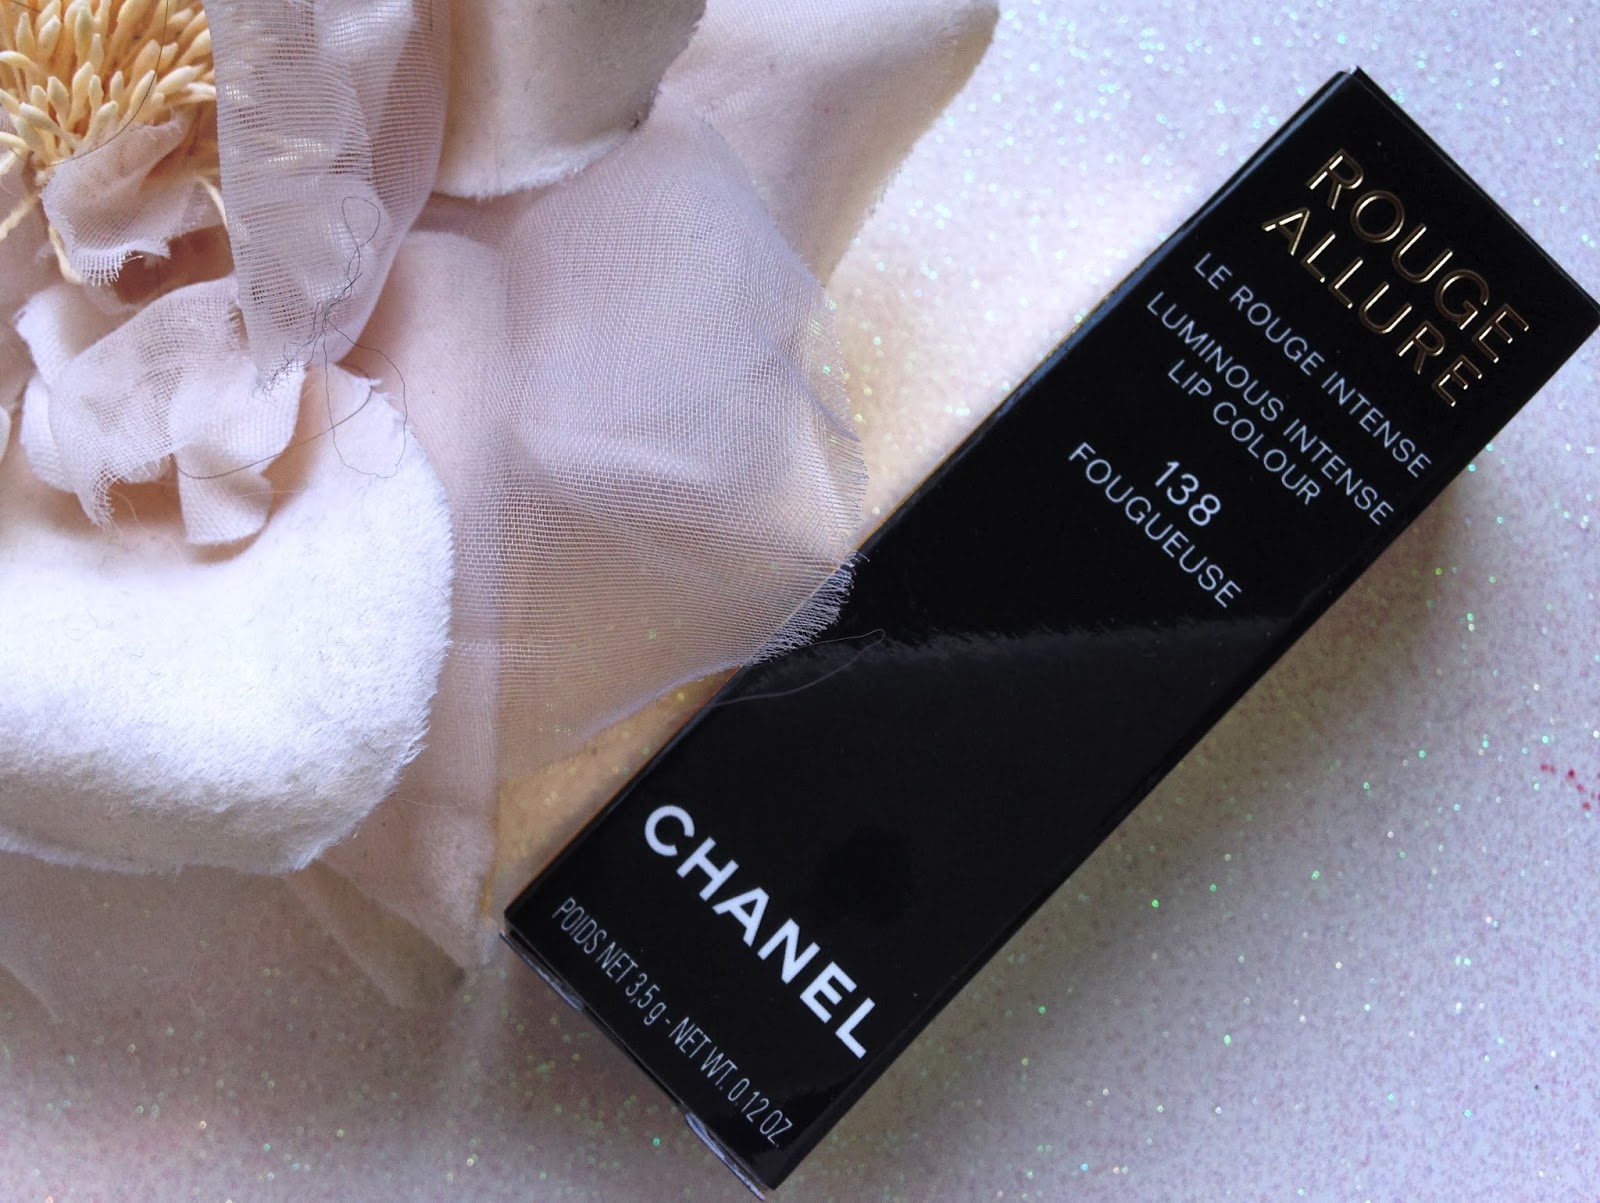 Chanel Rouge Allure Fougueuse Lipstick: Reviews, Photos and